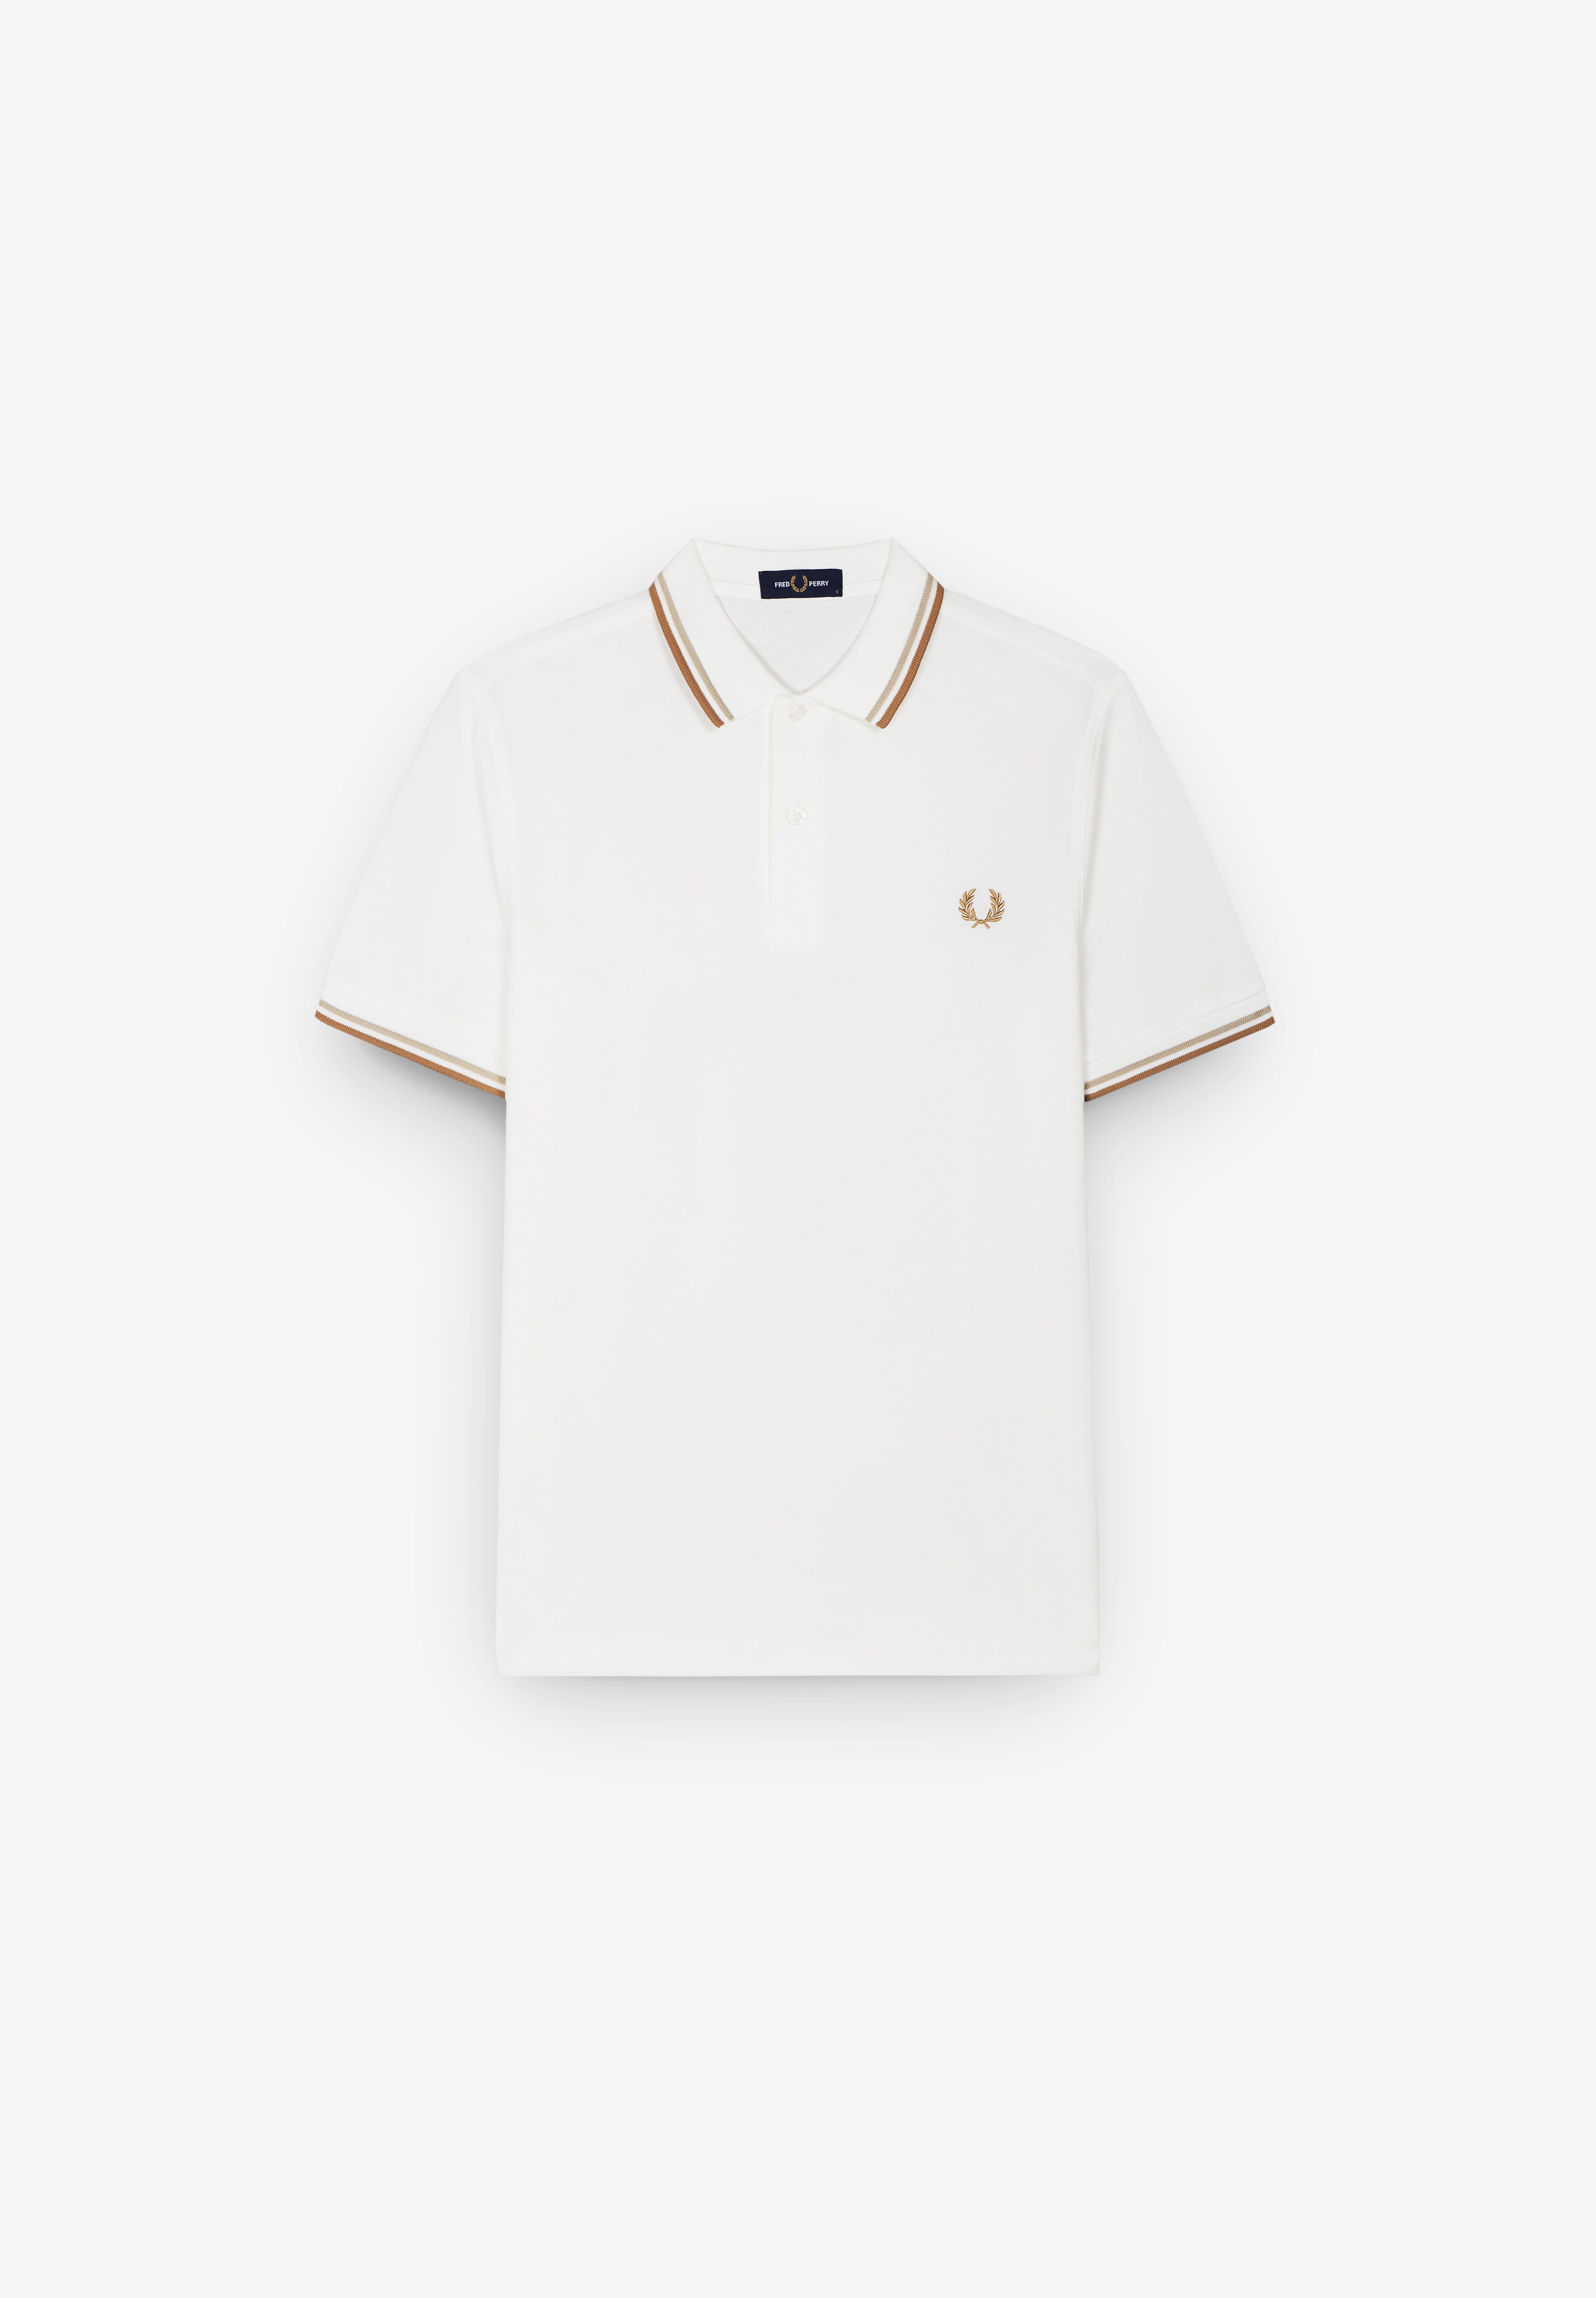 FRED PERRY | TWIN TIPPED FRED PERRY SHIRT